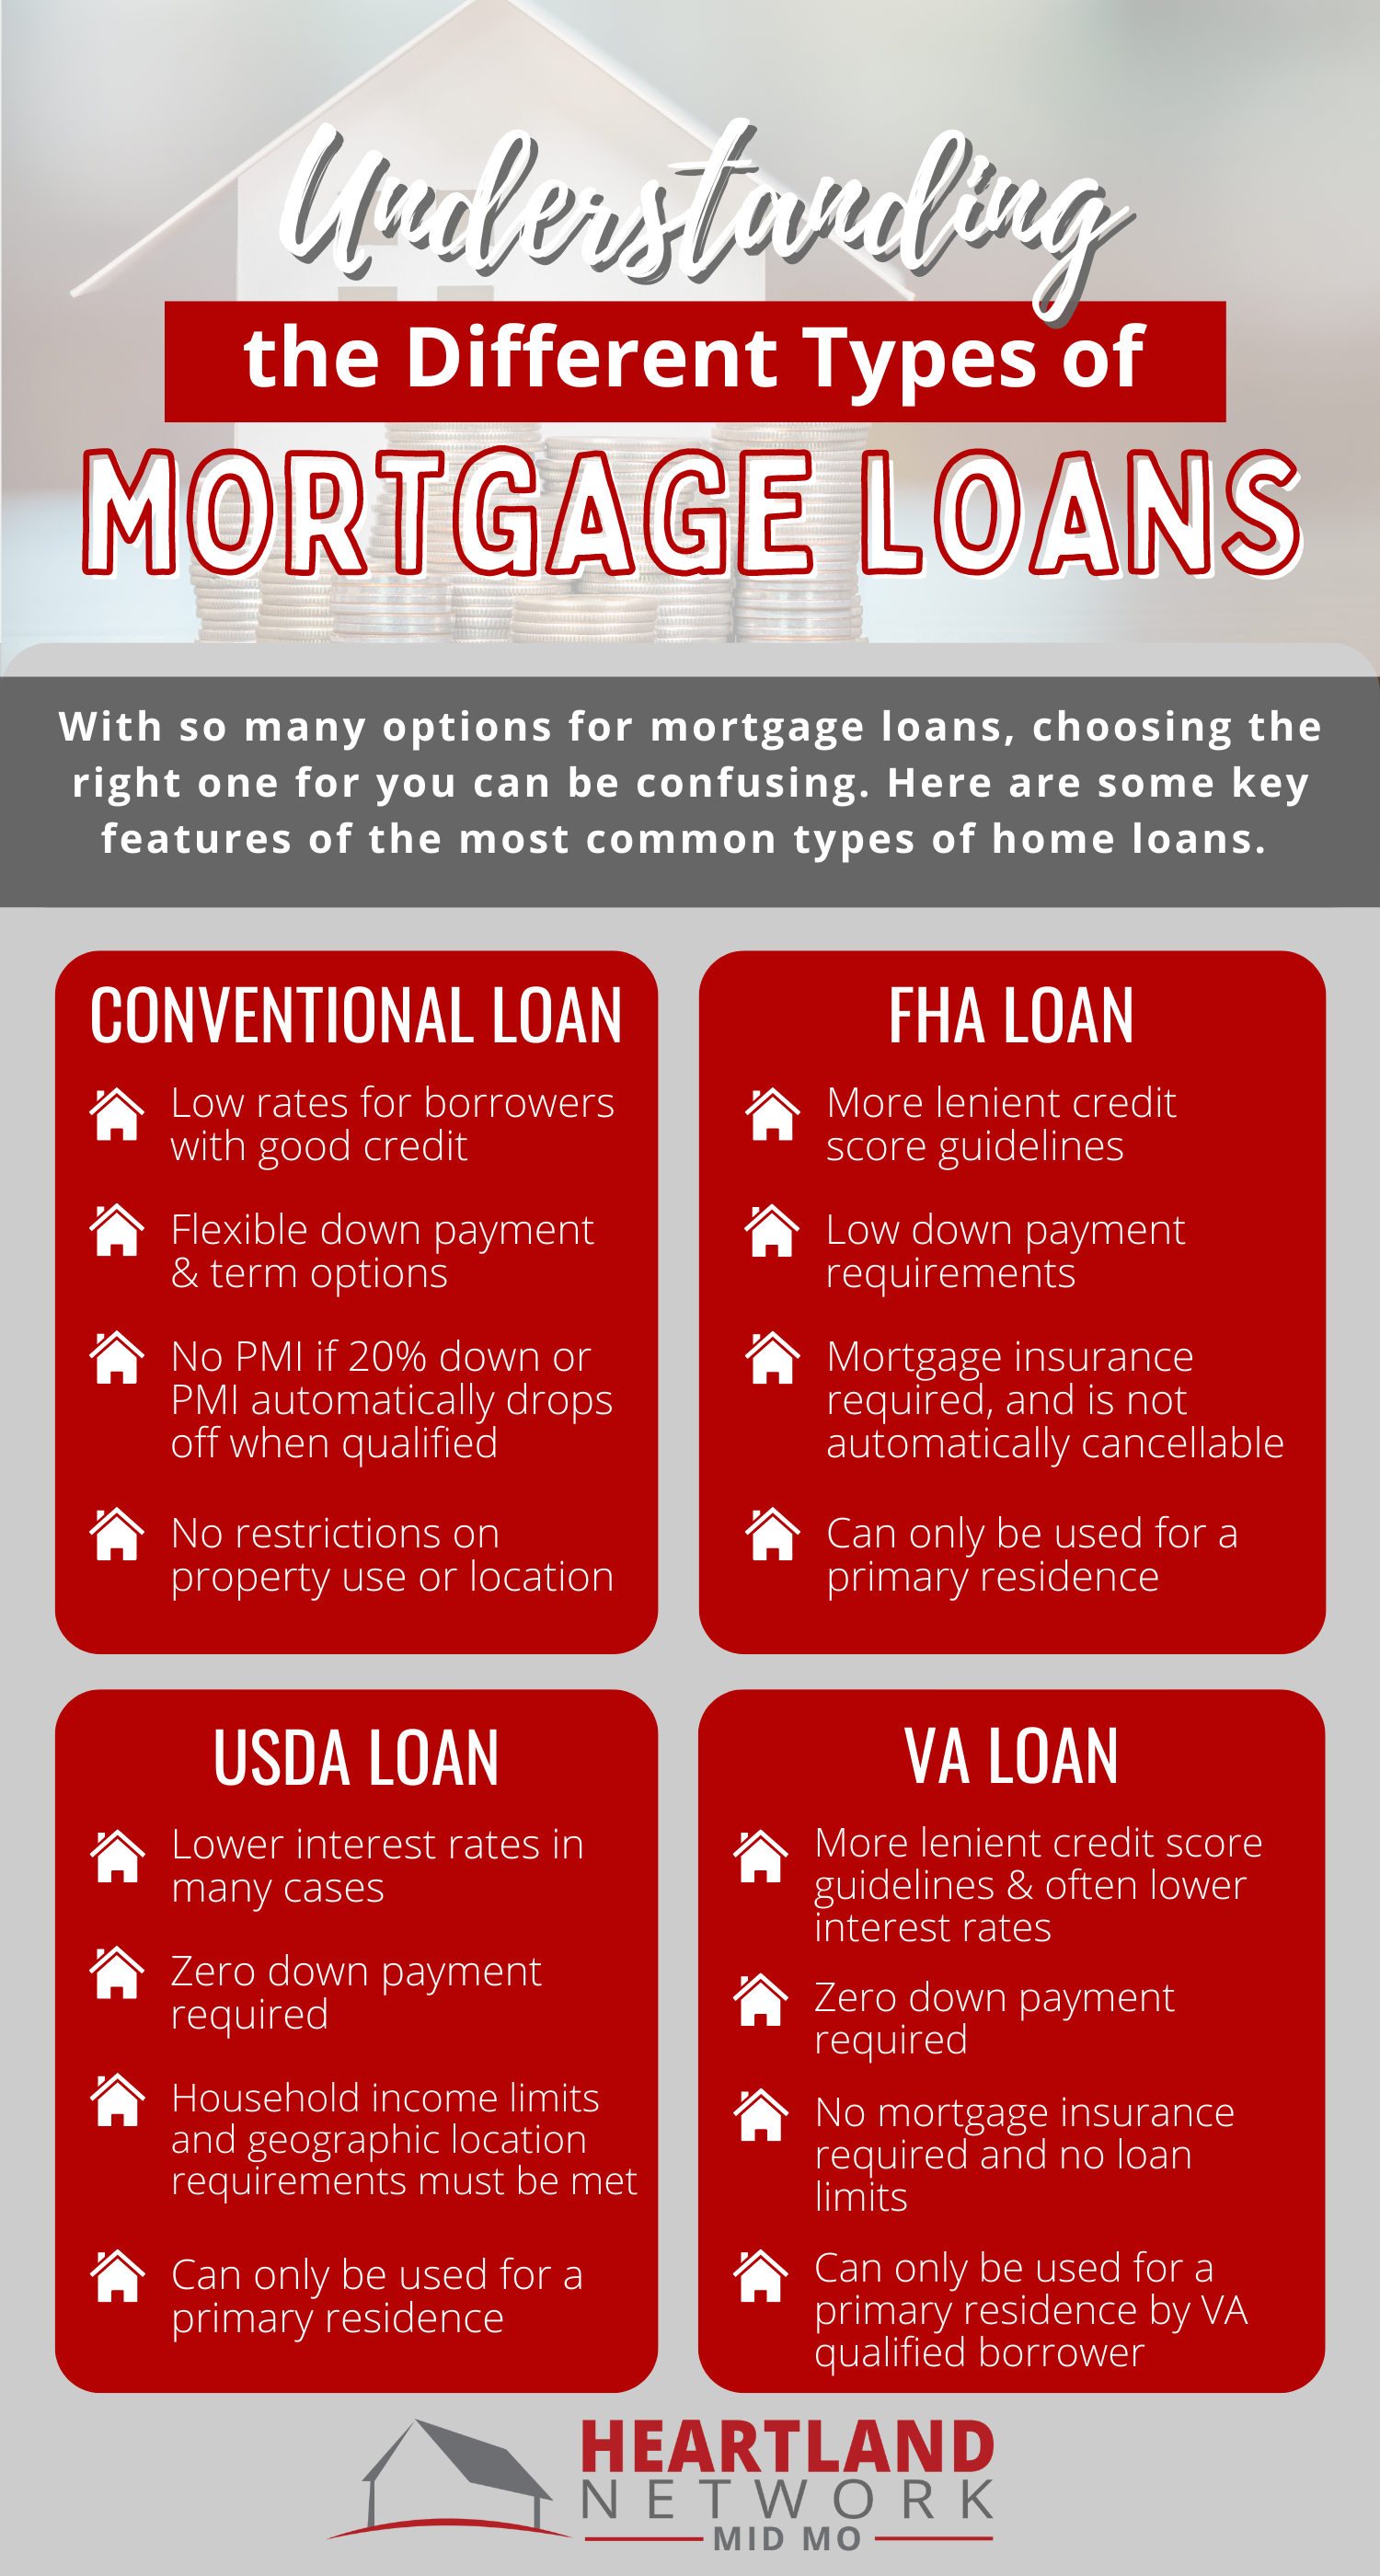 Understanding the Types of Mortgage Loans